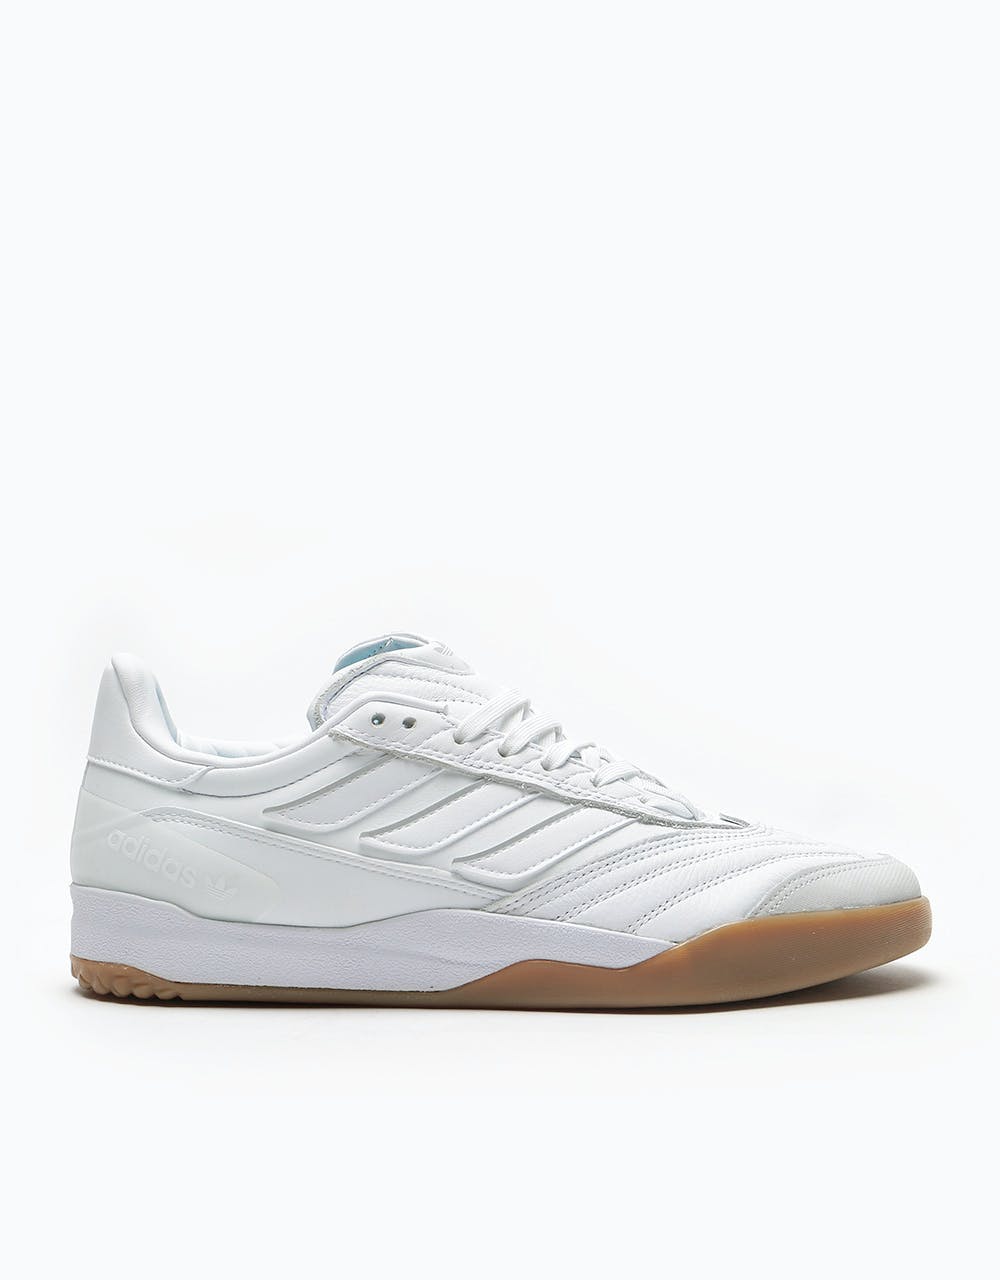 Adidas Copa Nationale Skate Shoes 